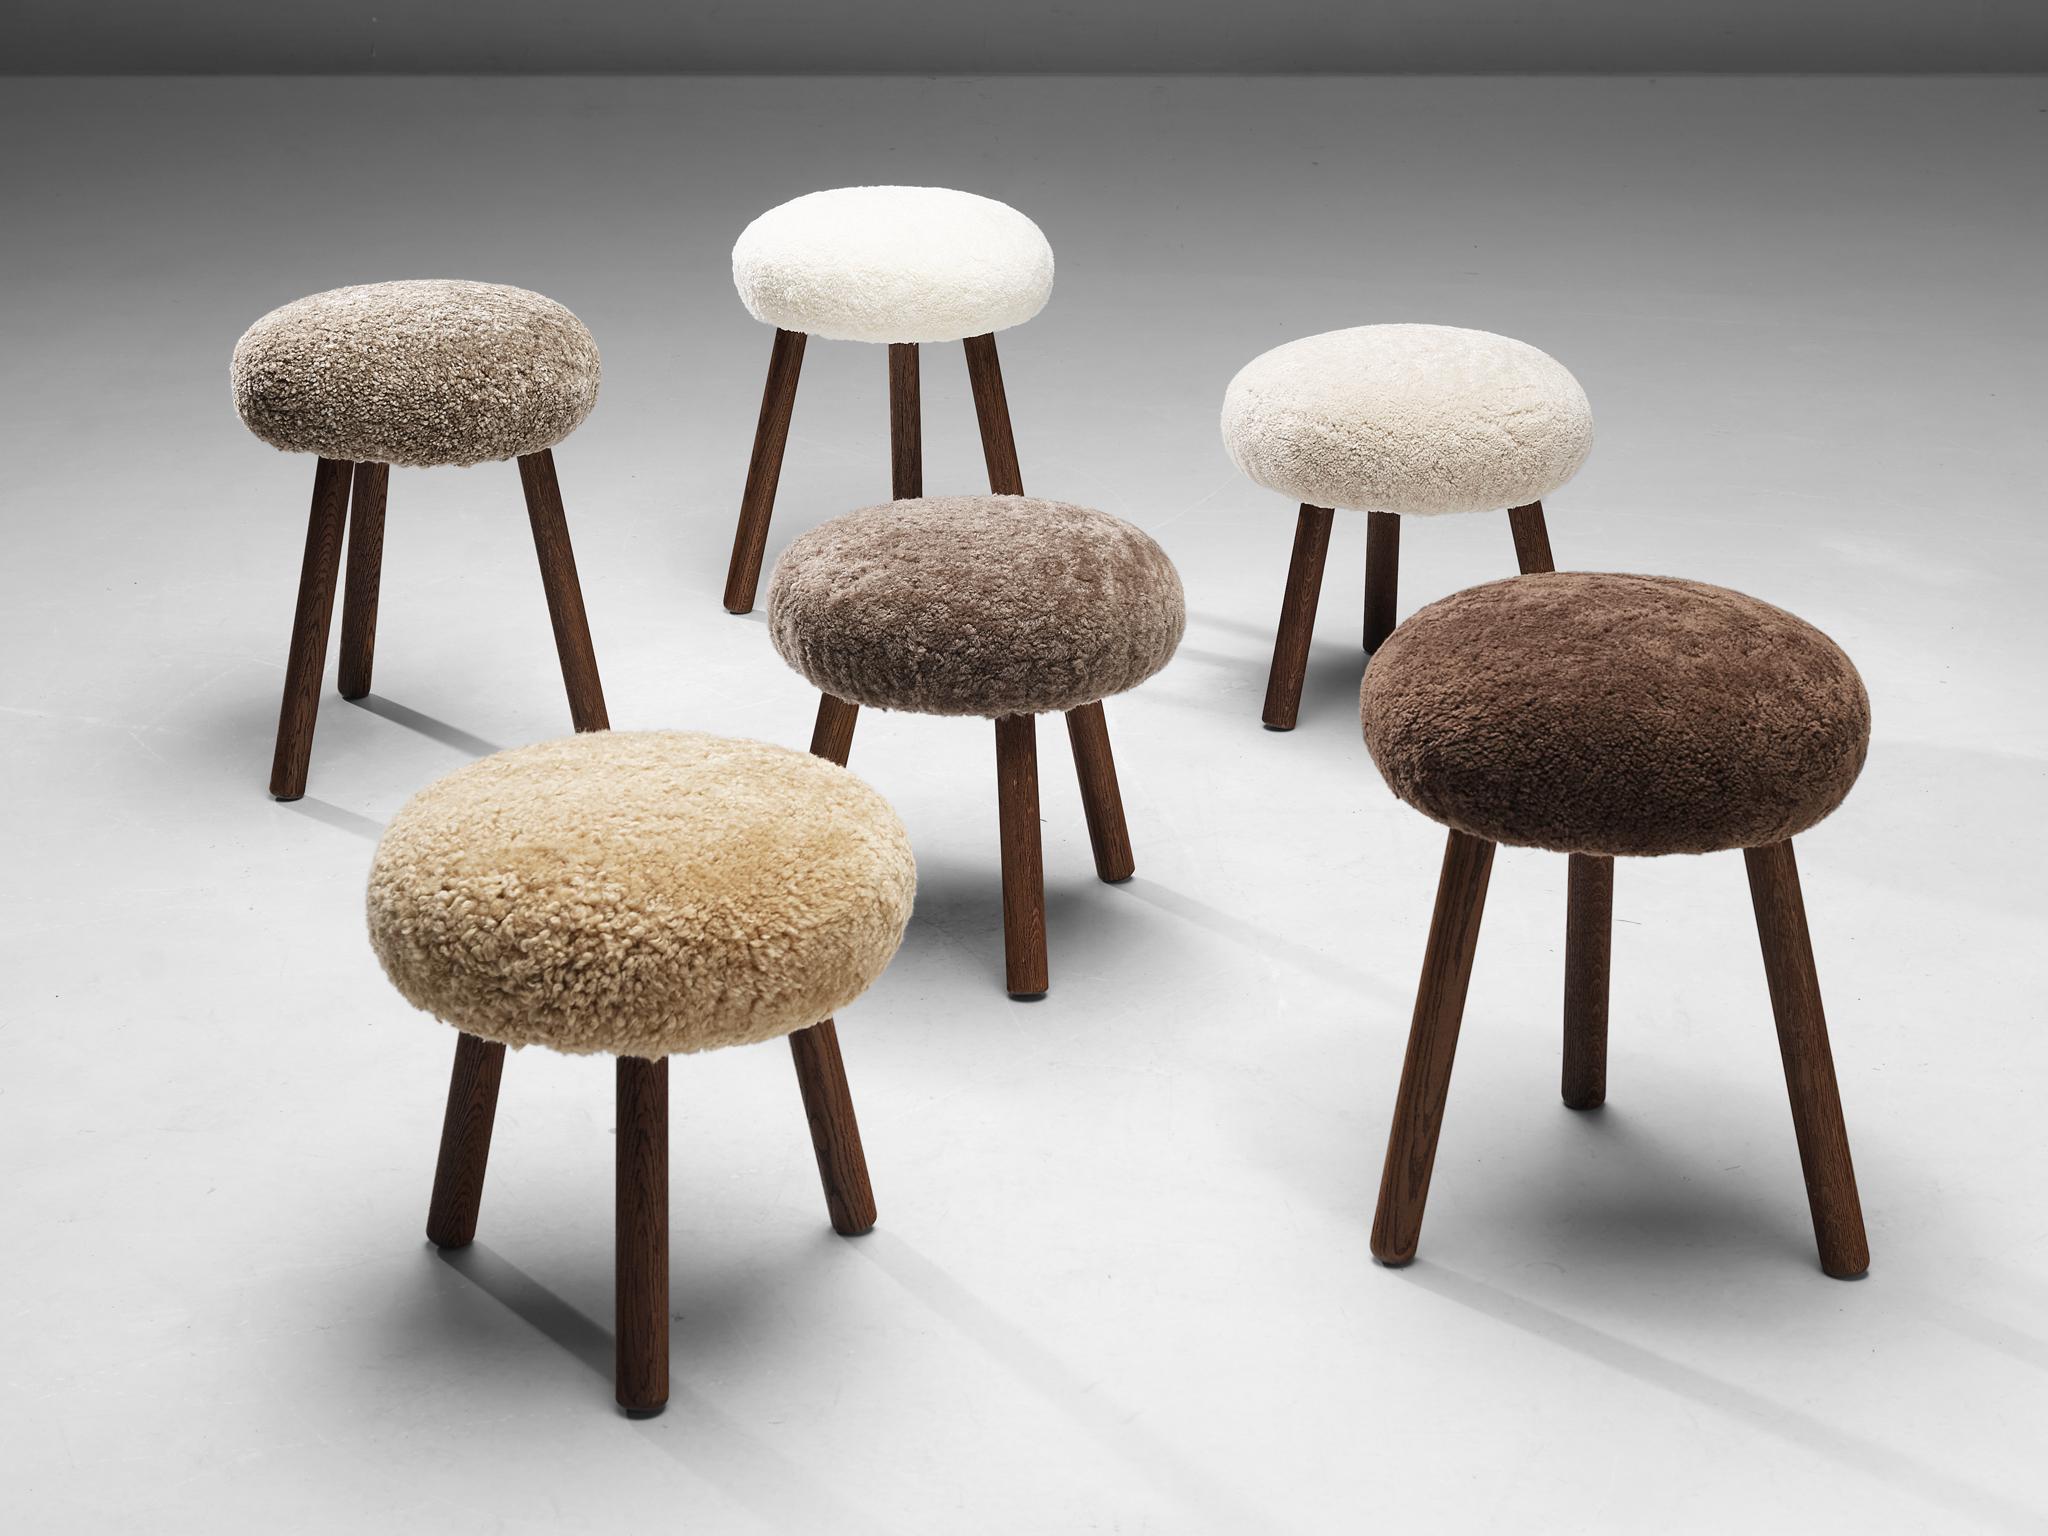 Tripod stools or side tables, solid oak, fabric, Switzerland, 1960s-1970s.

Beautiful crafted oak stools originating from the exhibition center in St. Gallen, Switzerland. The seats are reupholstered in a soft shearling fabric that ranges in color